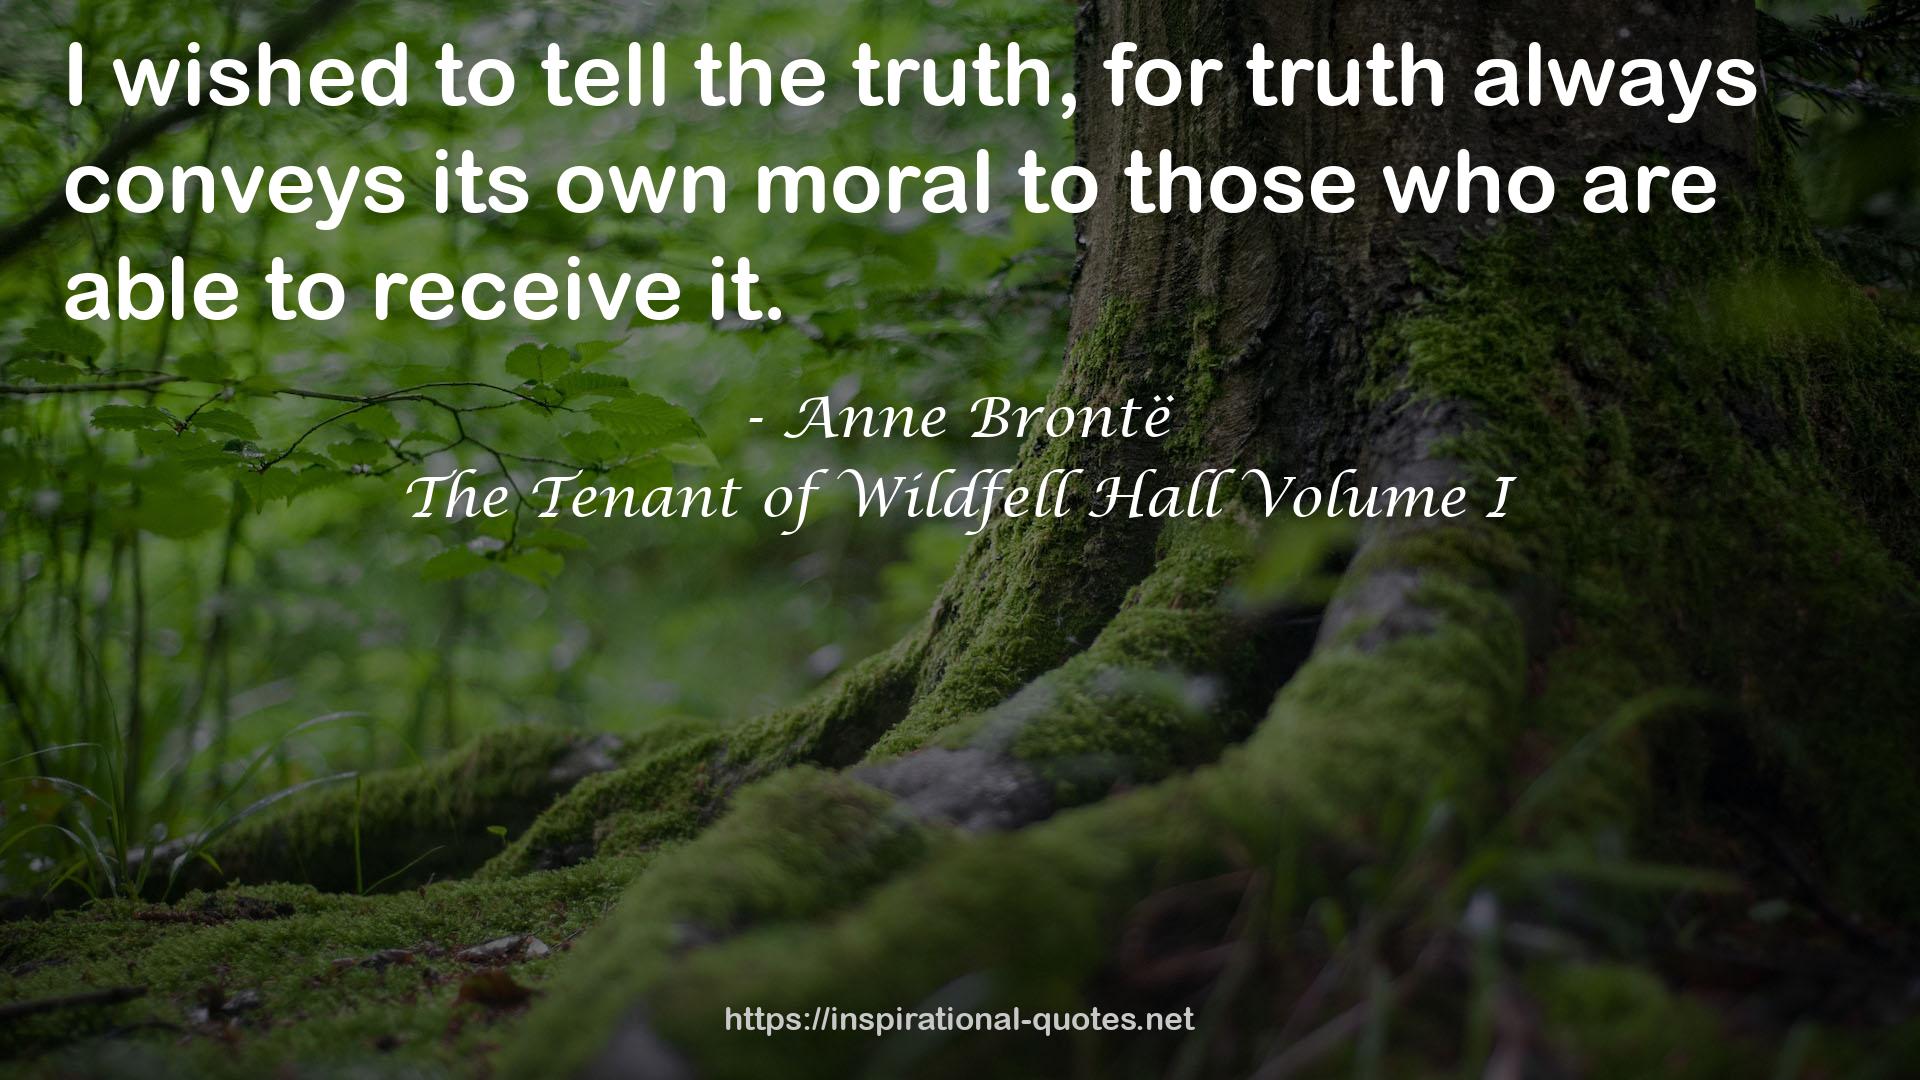 The Tenant of Wildfell Hall Volume I QUOTES